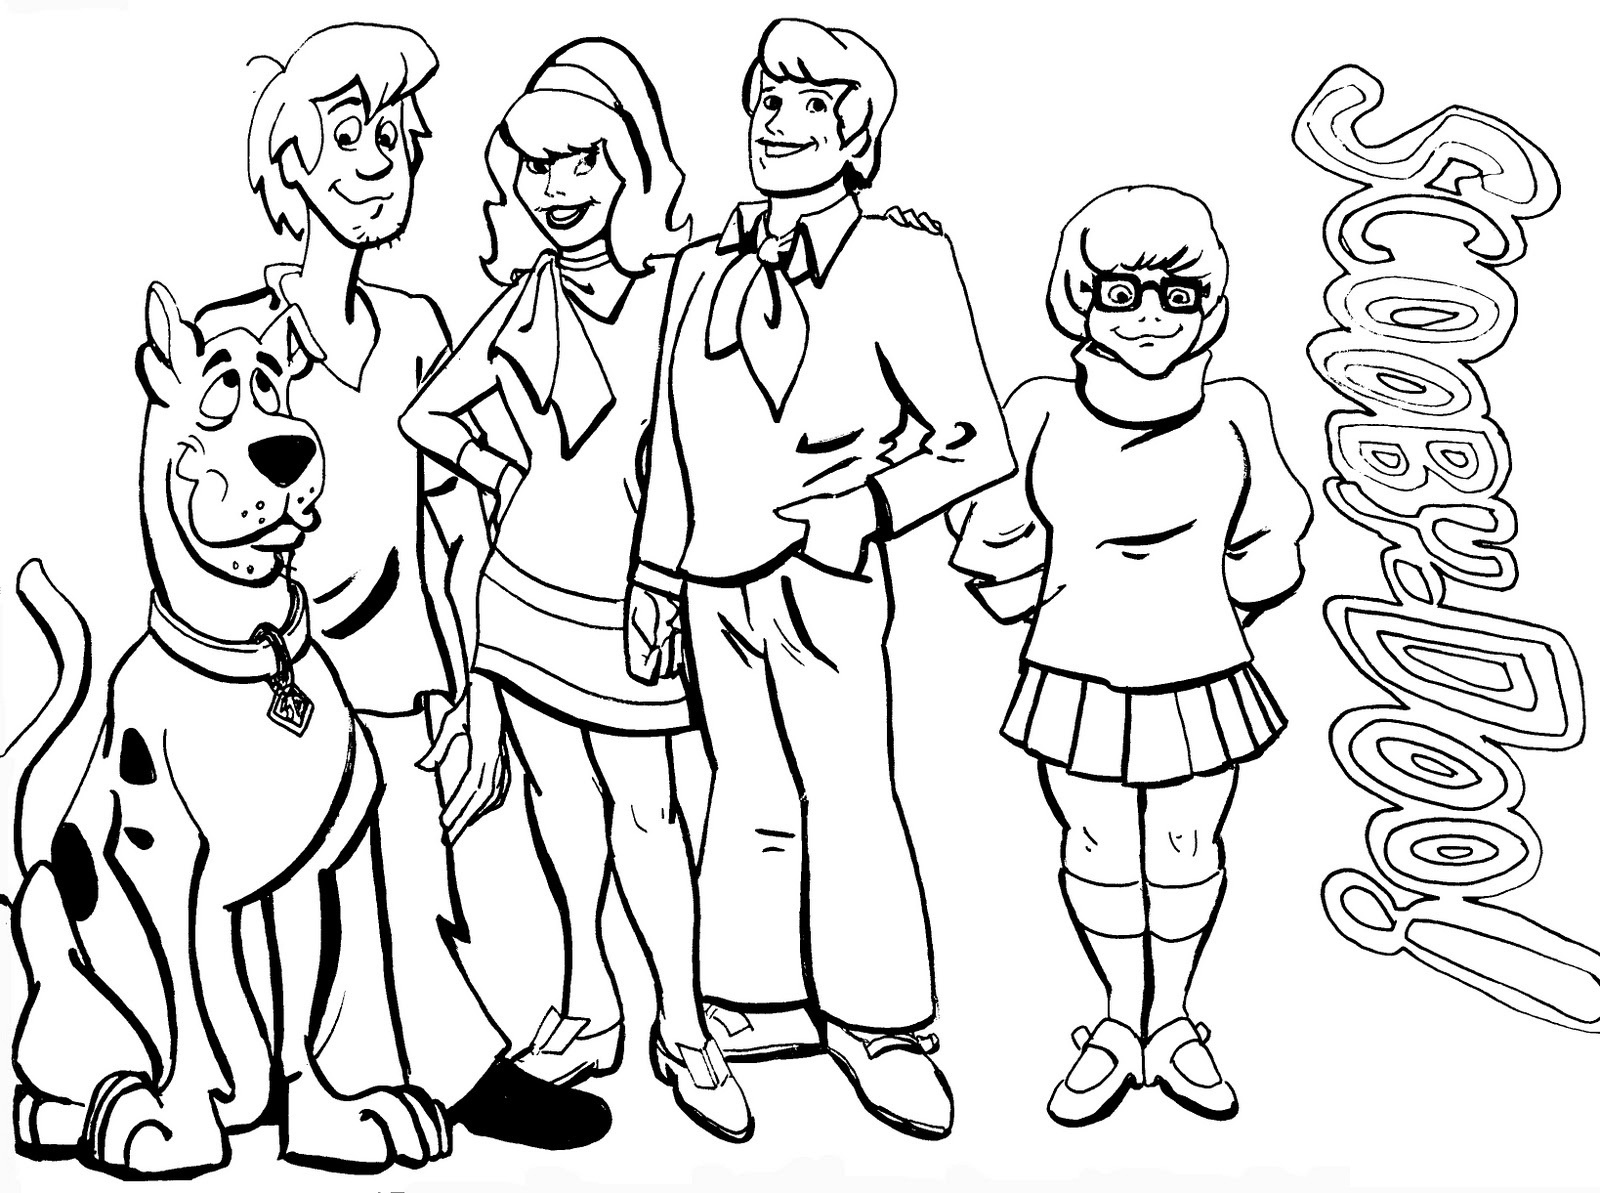 Printable Scooby Doo Coloring Pages | Coloringme - Free Printable Coloring Pages Scooby Doo